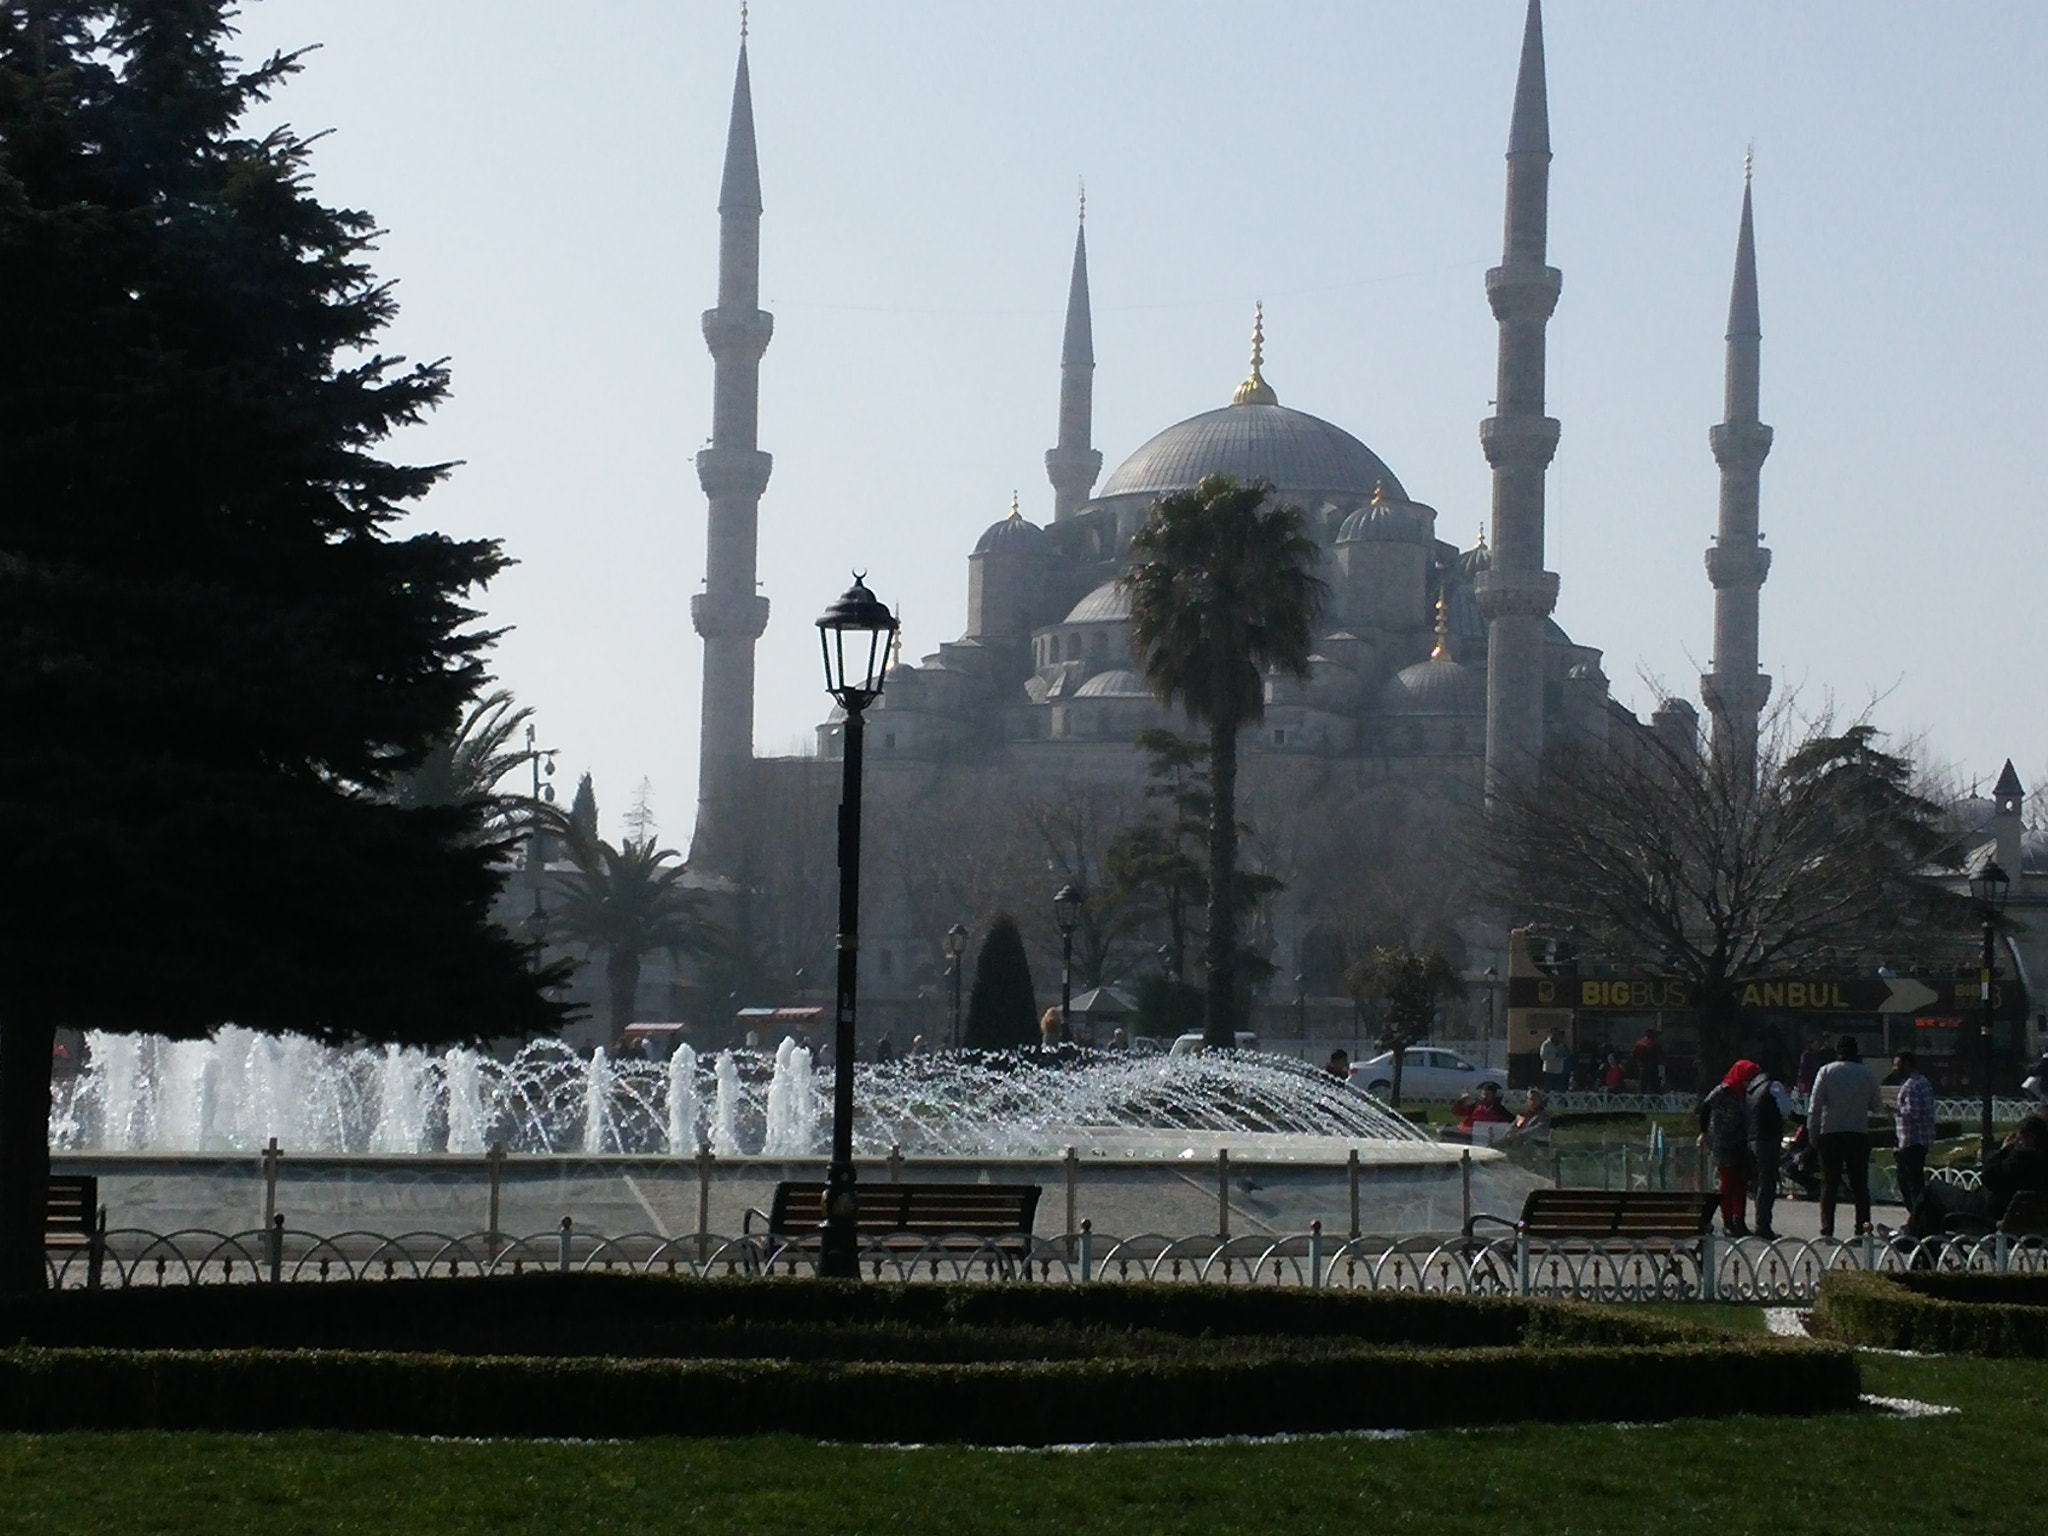 LG G Pro2 sample photo. Sultan ahmed blue mosque in distance photography